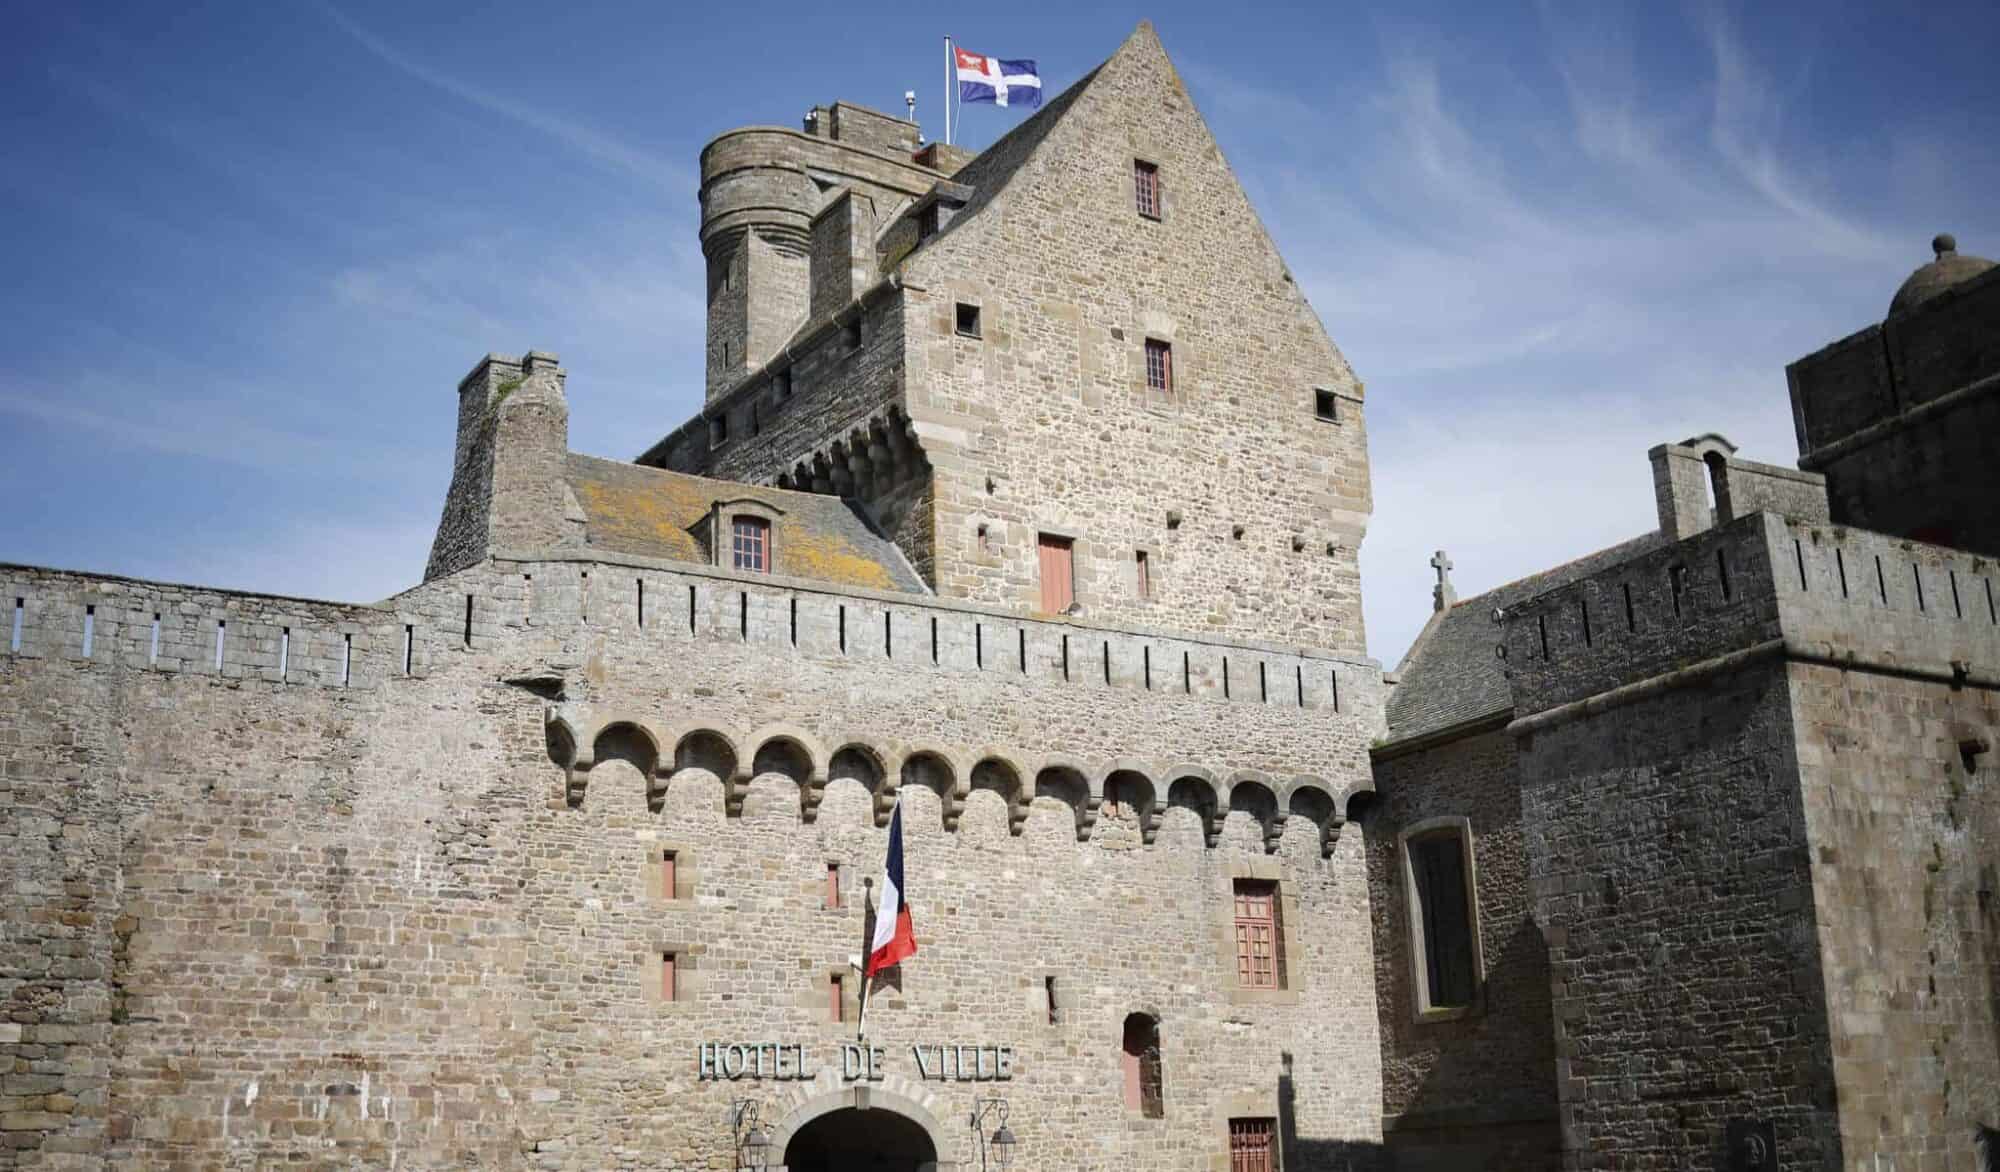 Saint Malo's Hotel de Ville or town hall with its medieval-styled bricks and the flags of France and Brittany.